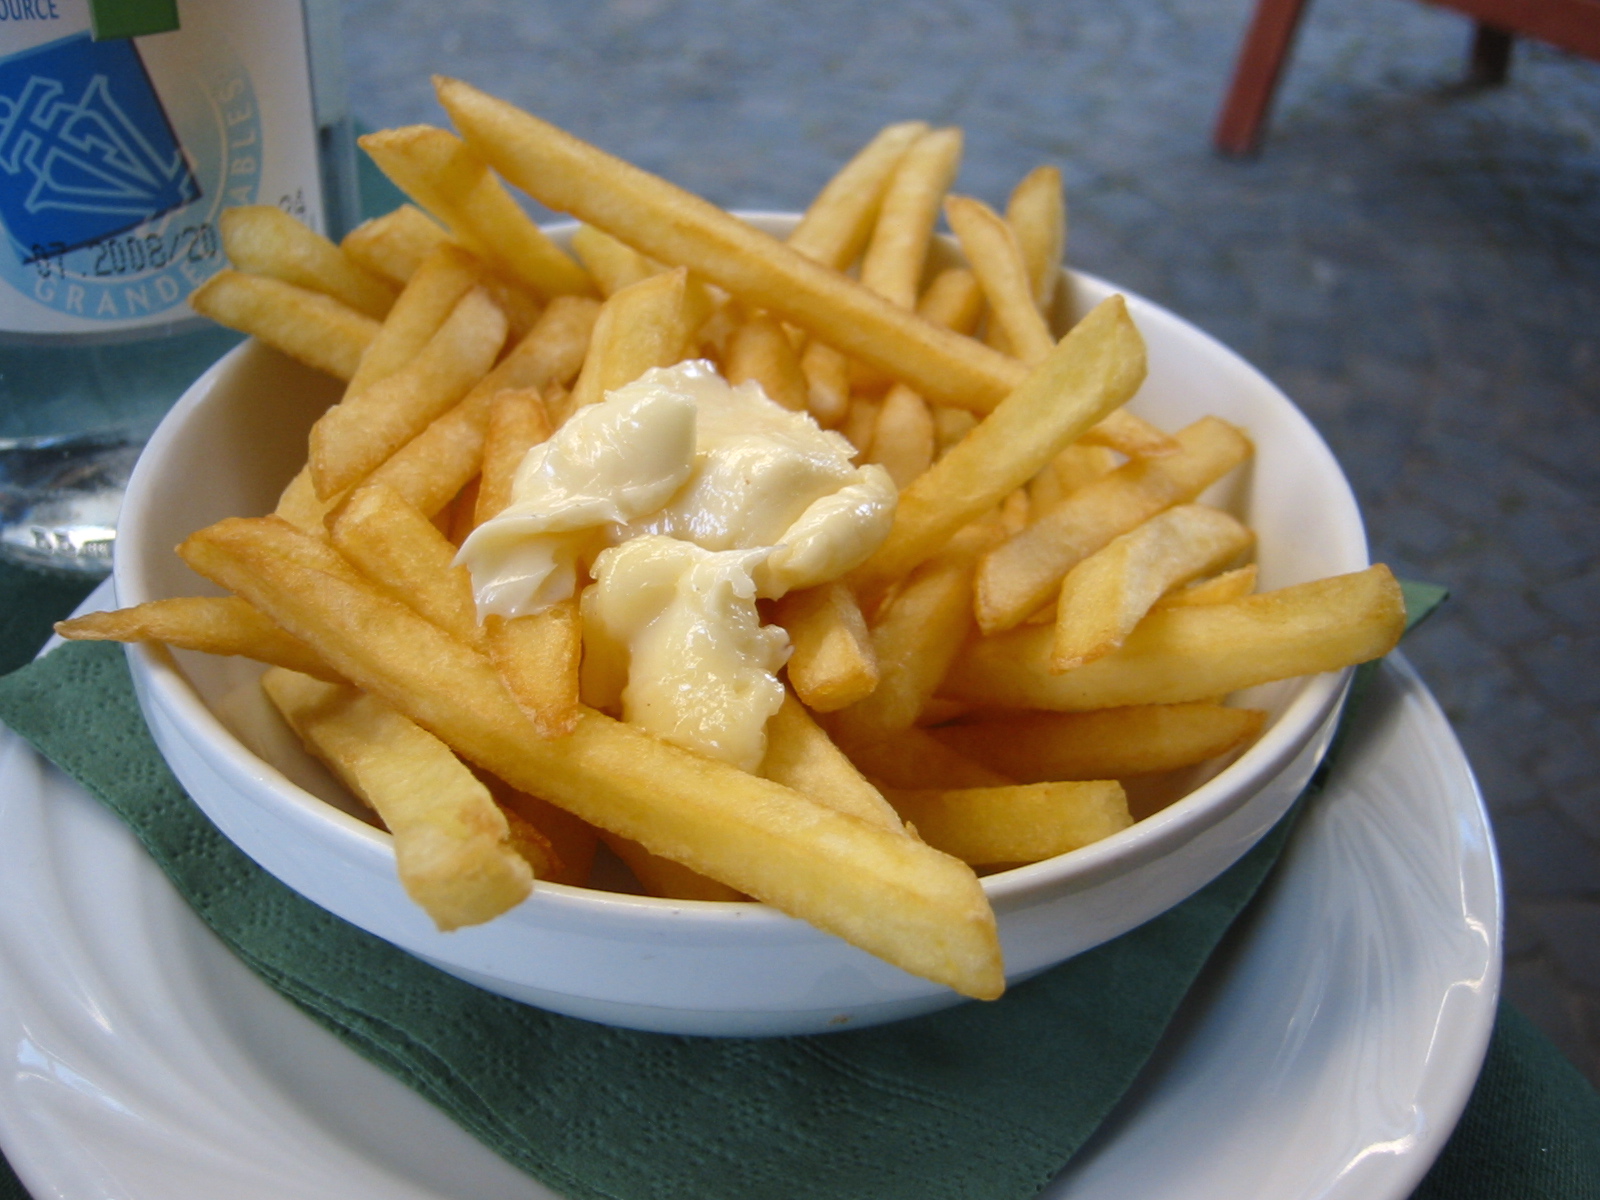 a bowl filled with french fries with white sauce